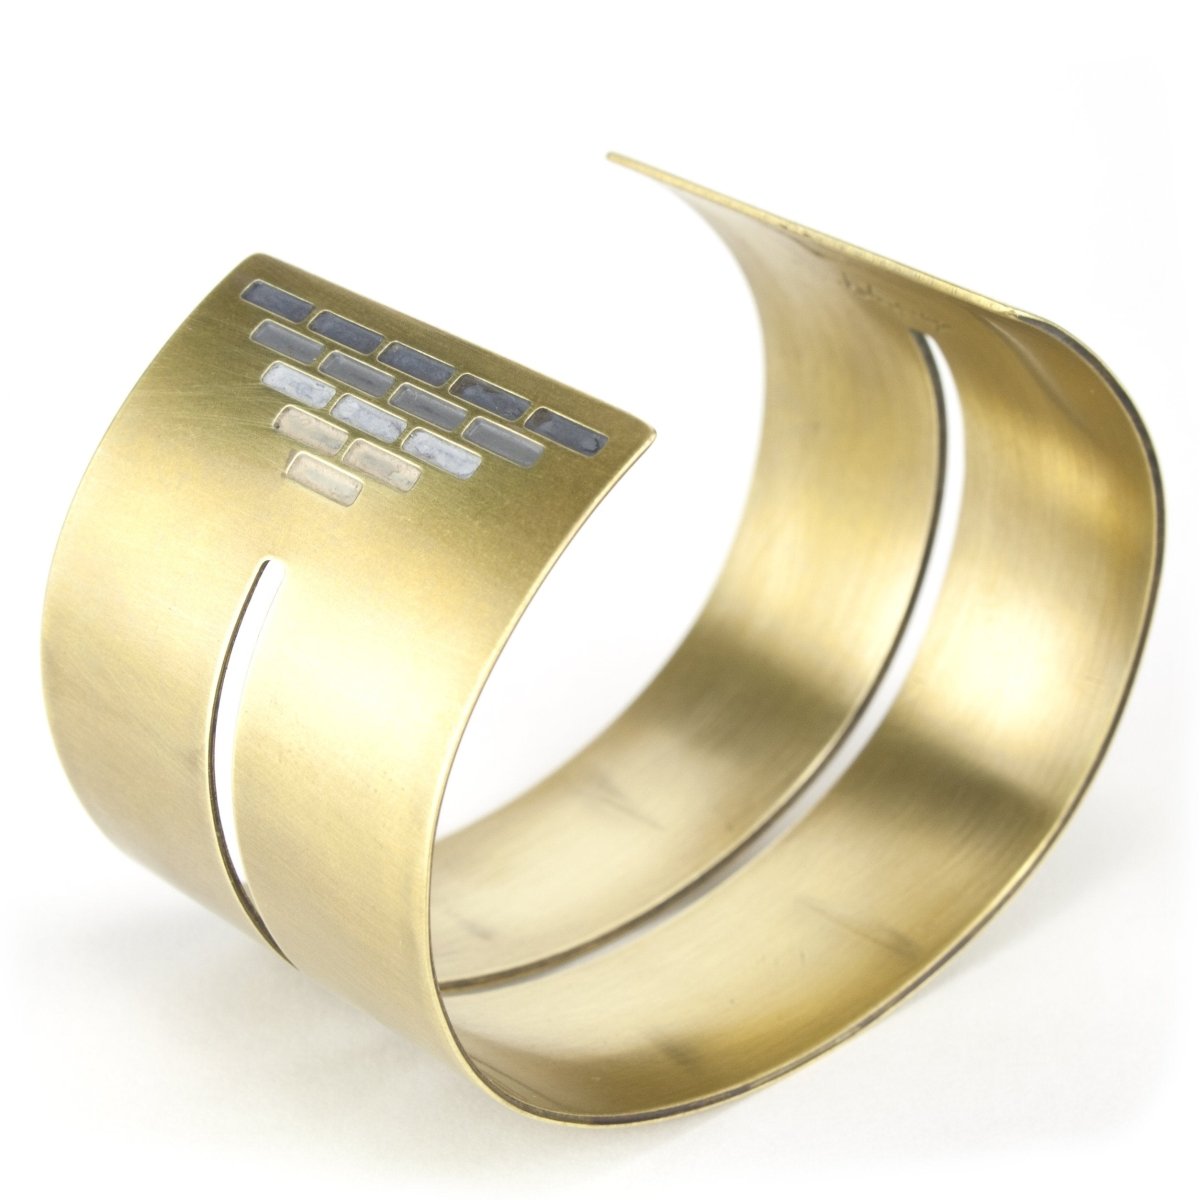 Wide, bold, brass cuff bracelet in the Portland colorway, with a cutout slit that runs through the center of the cuff and stops just short of a pyramid of grayscale paint on either end. Hand-crafted in Portland, Oregon. 